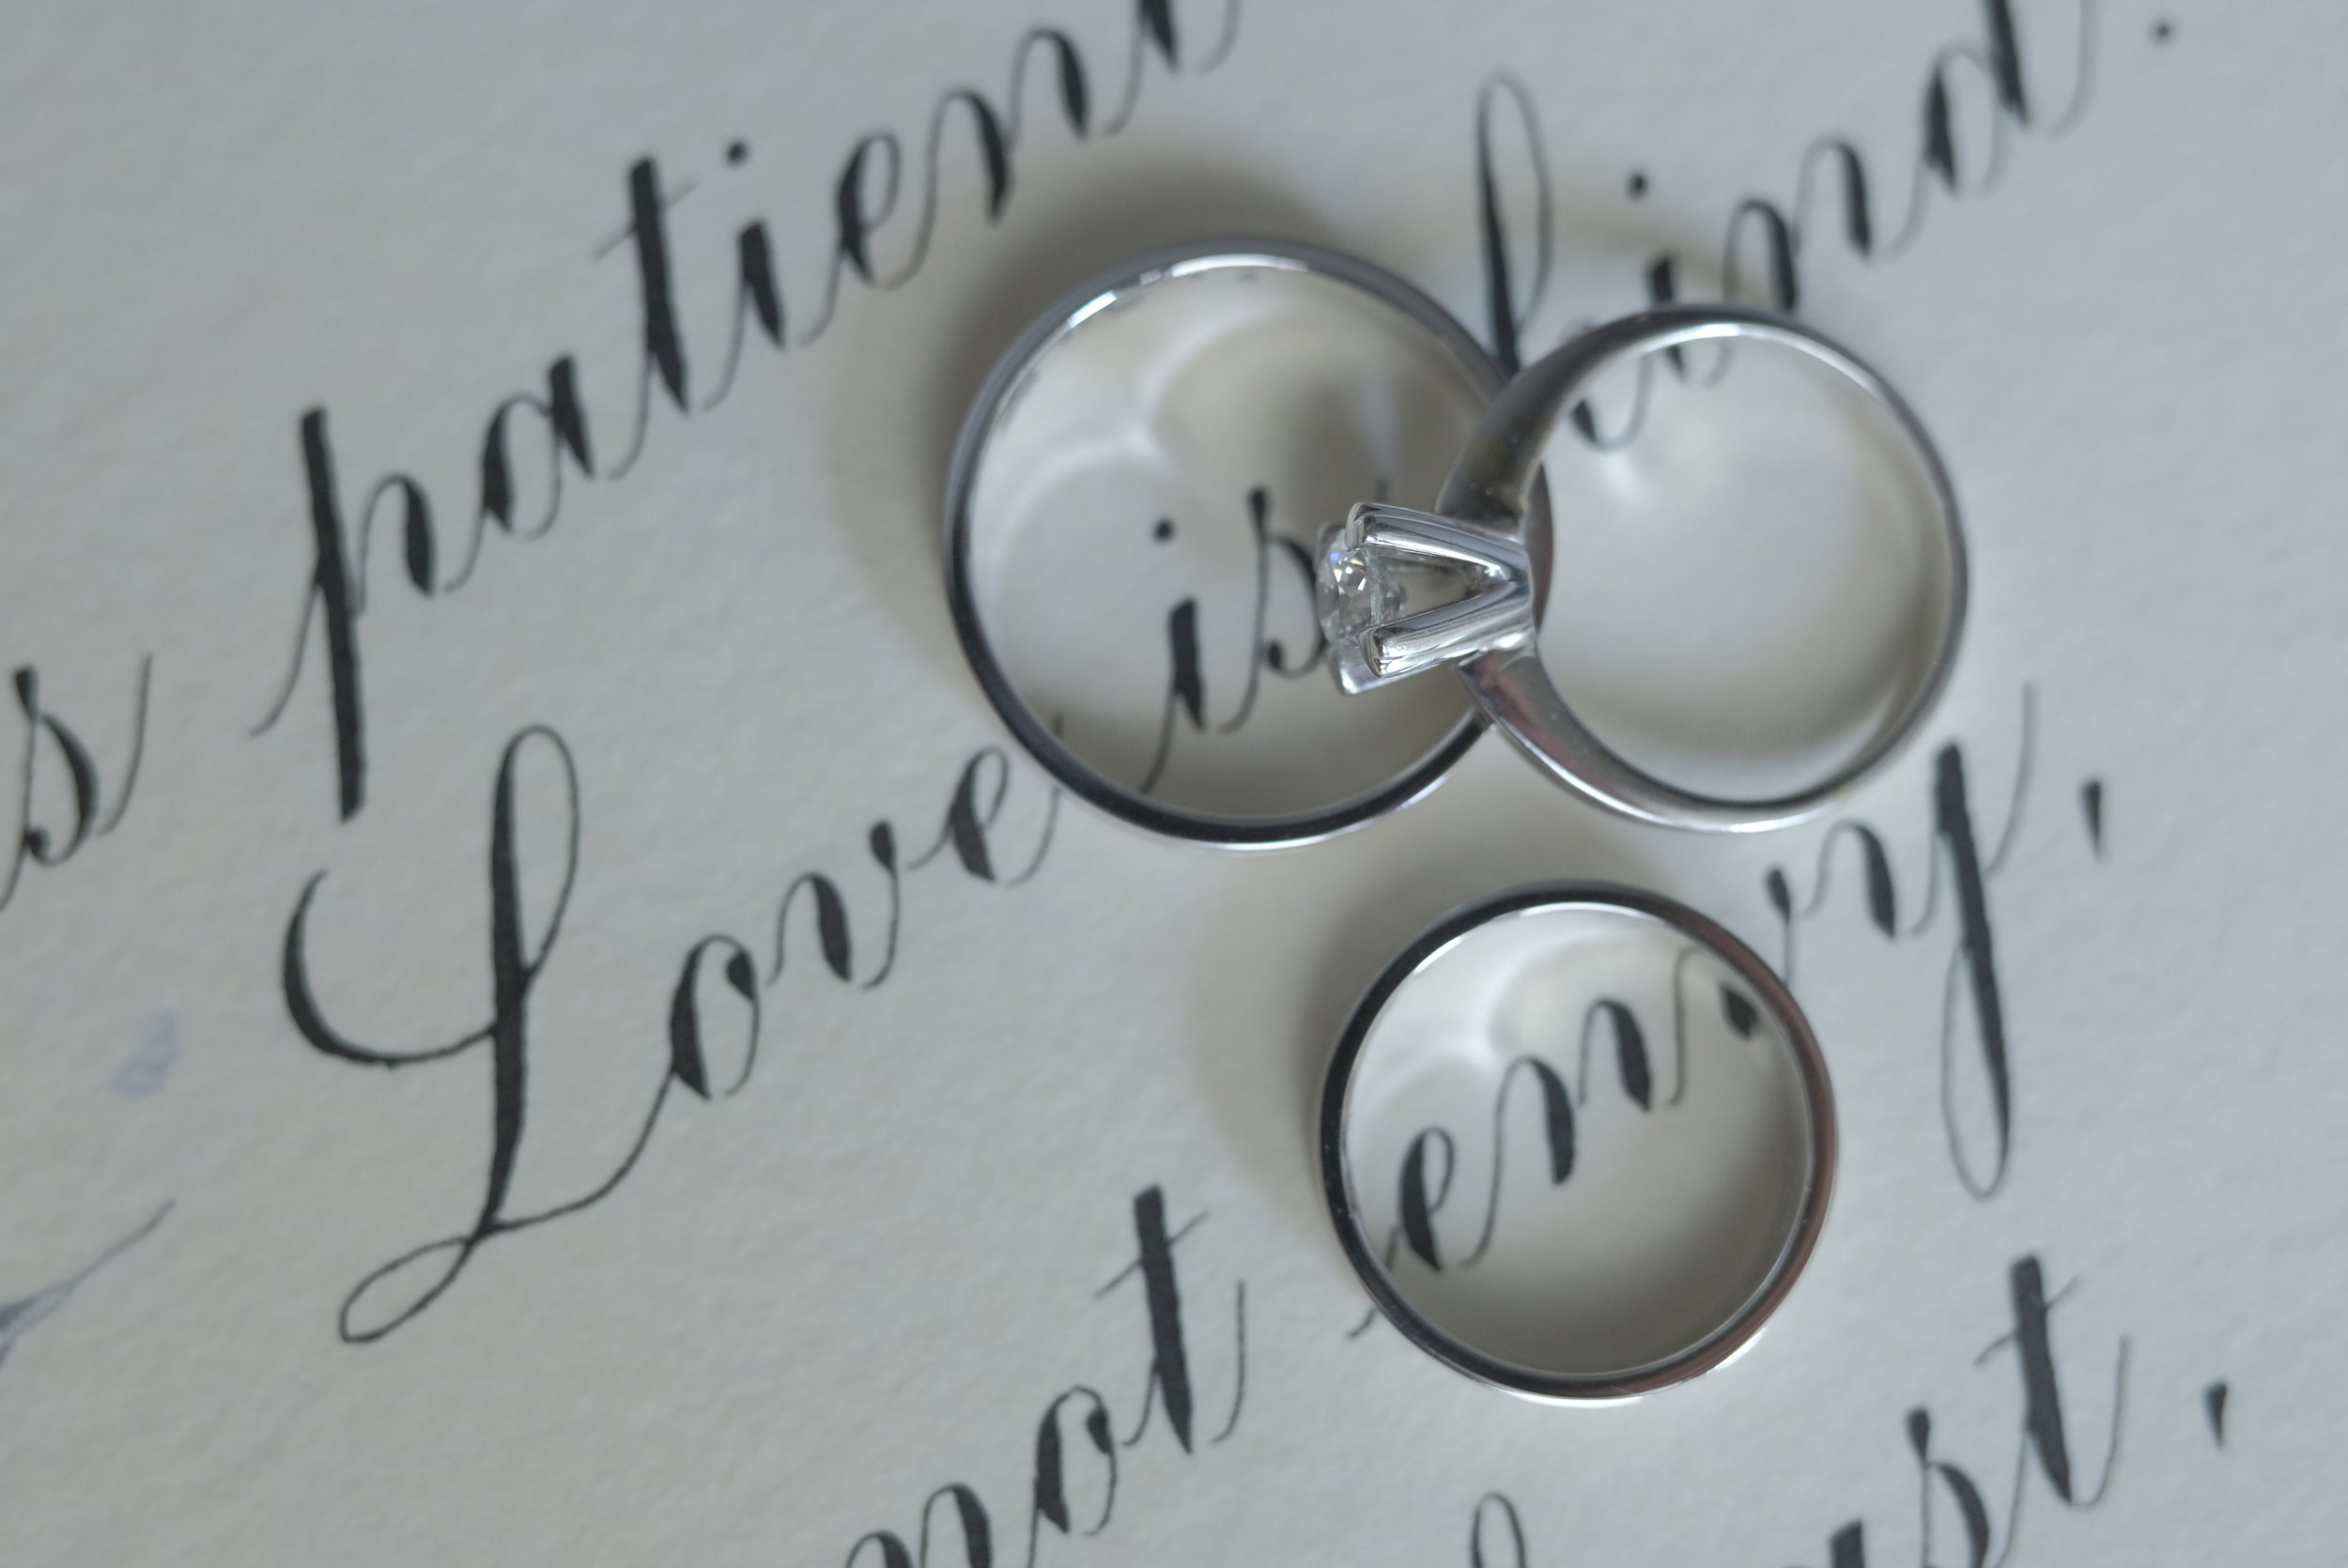 Vows-calligraphy.jpg